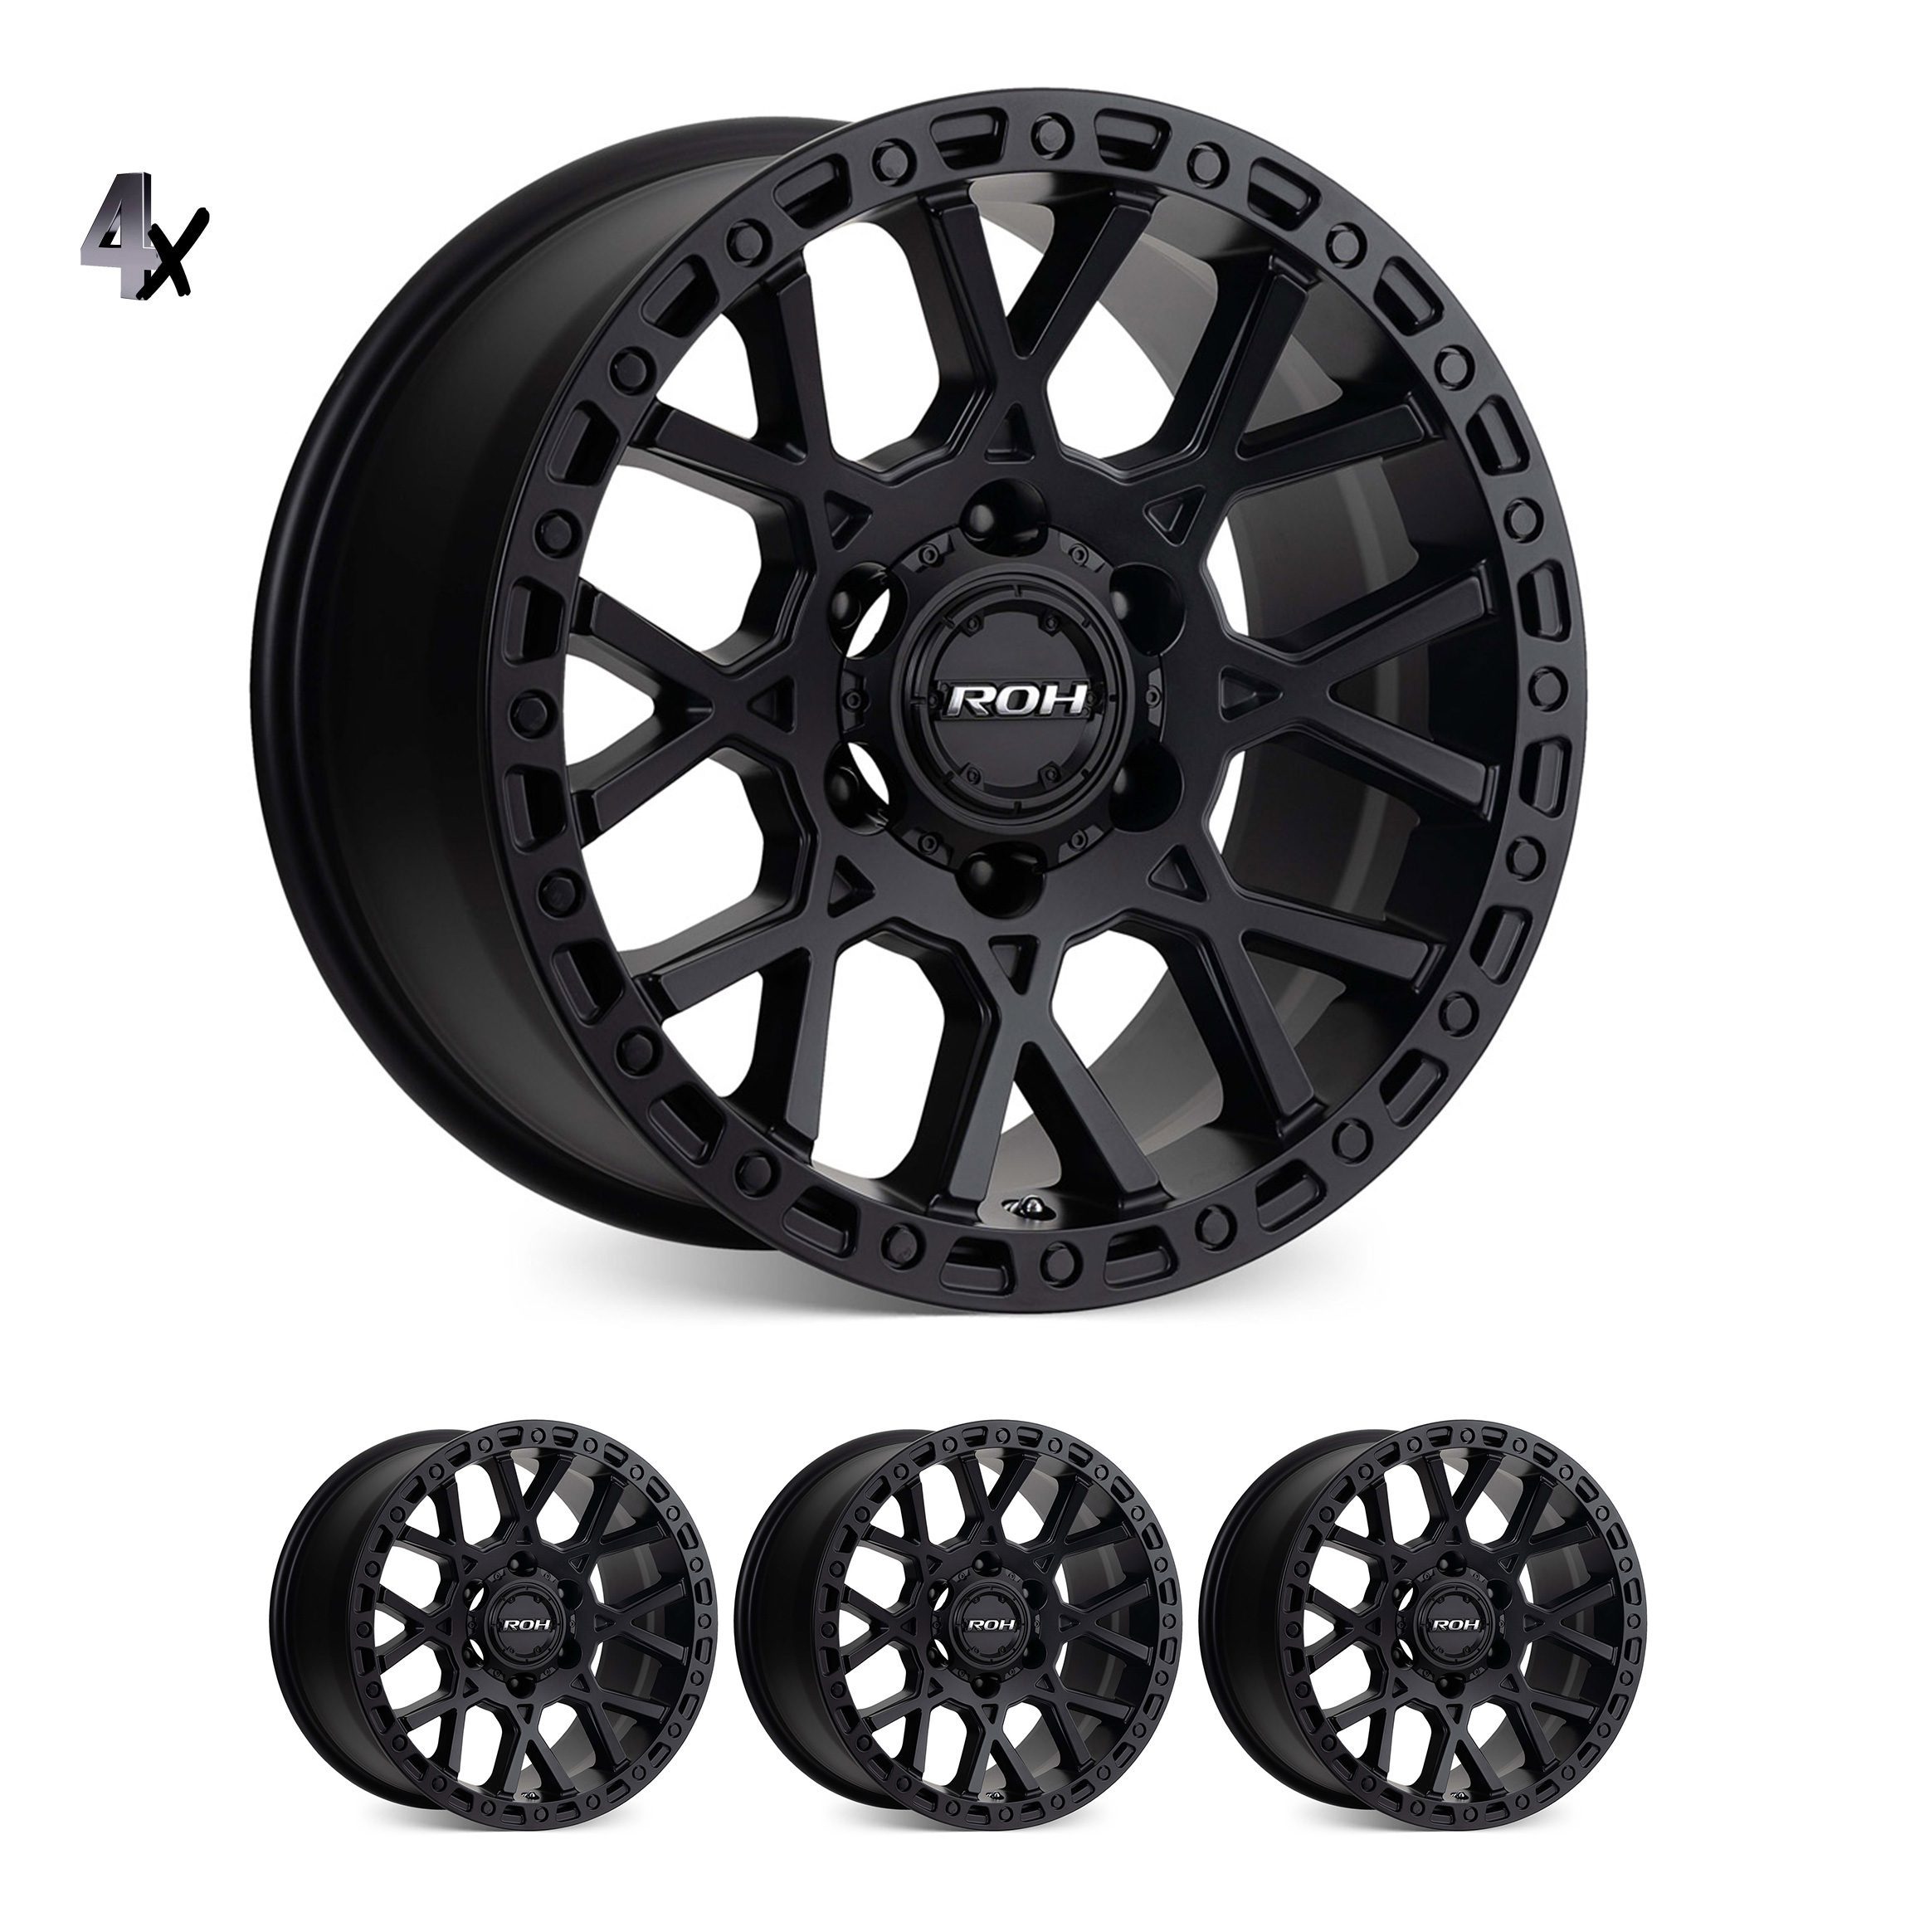 LC300 (17X9) 4x CRAWLER WHEELS (6/139) +25 OFFSET with fenders